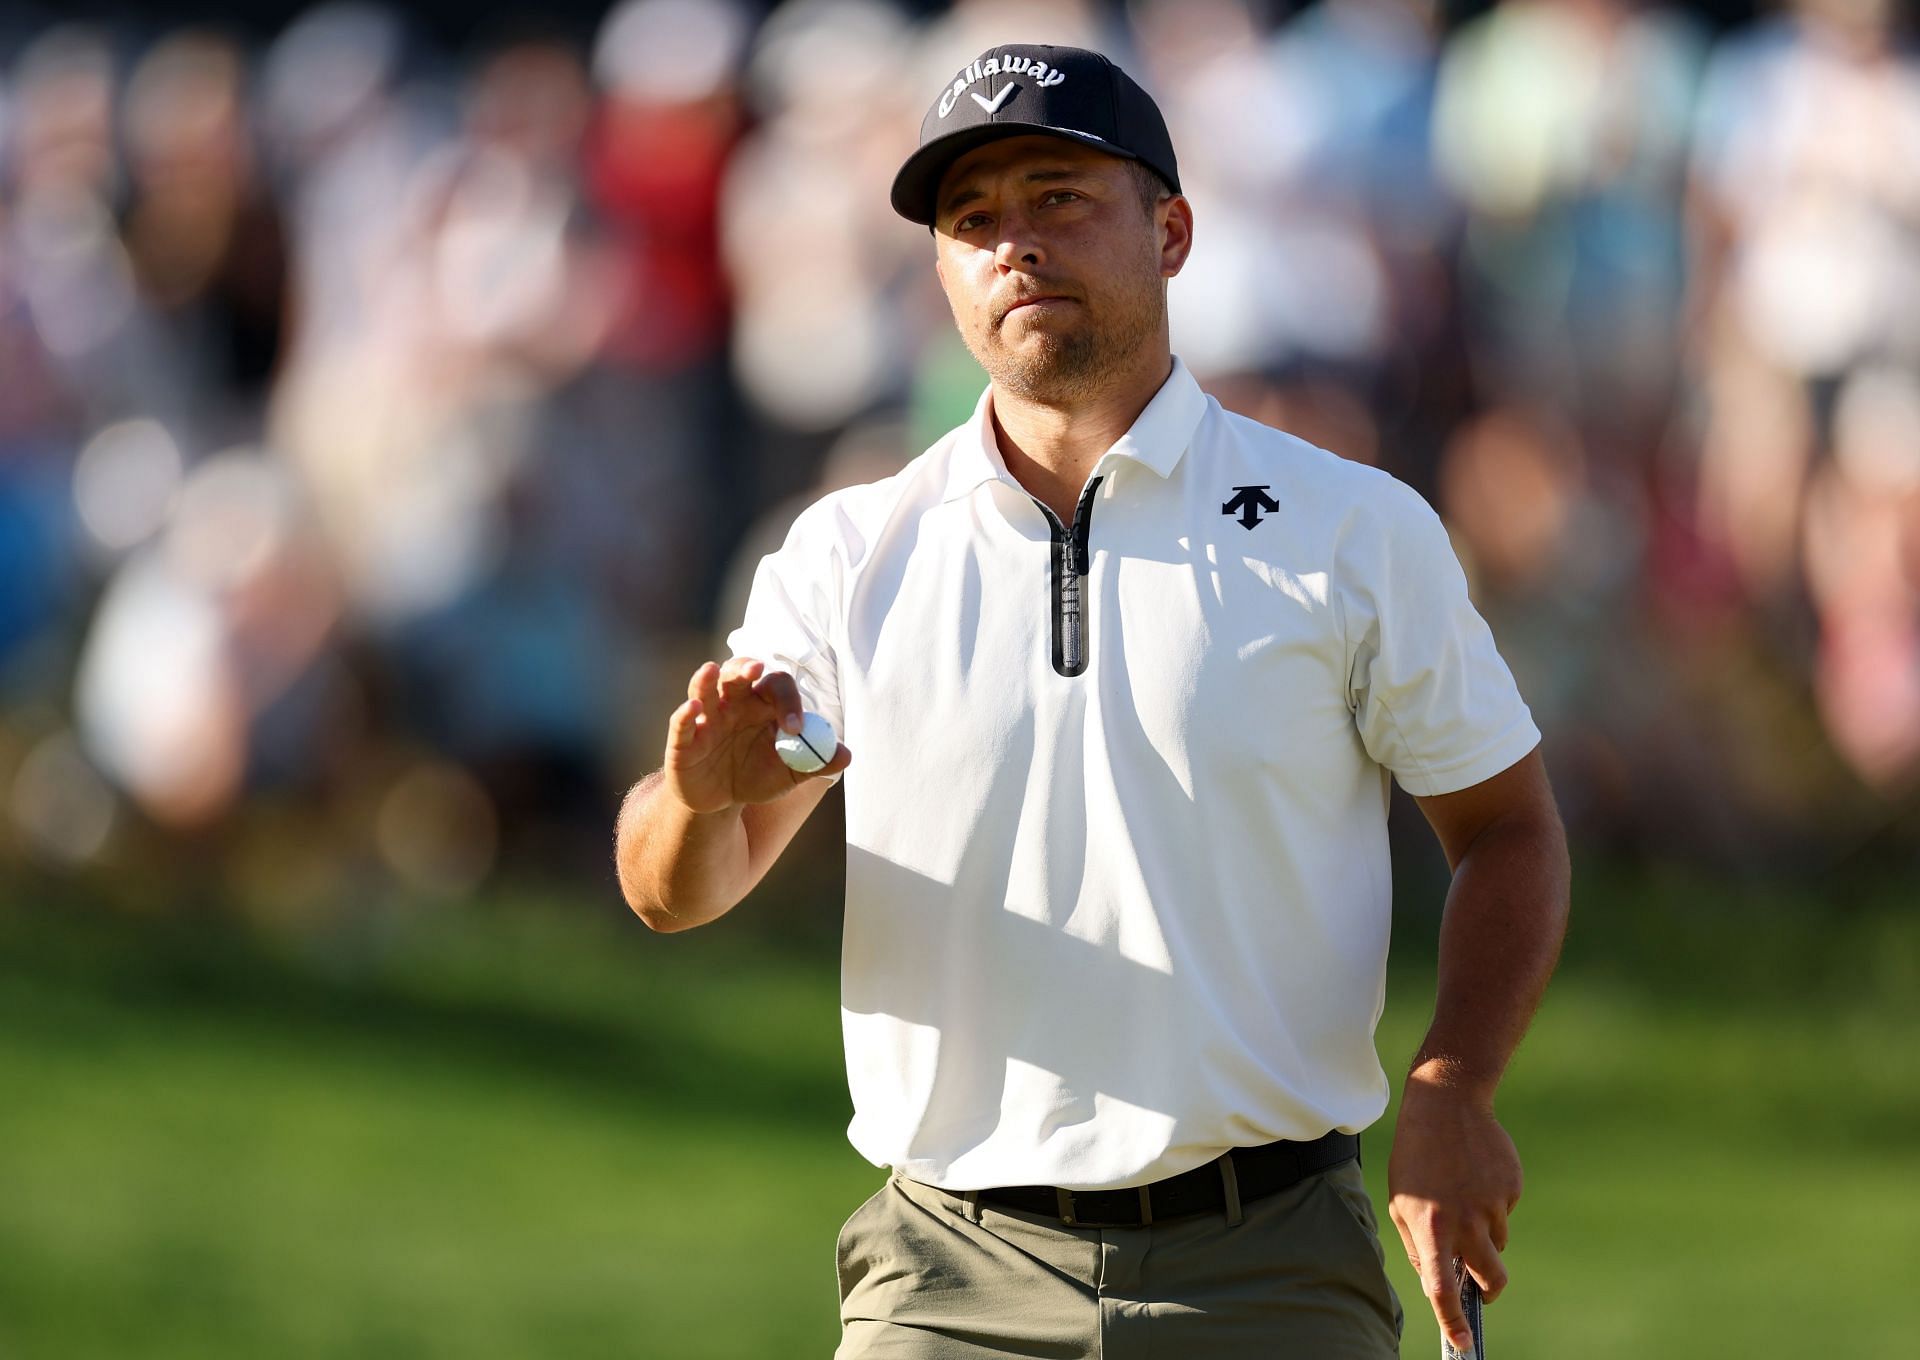 Xander Schauffele shares joint lead at the 2024 PGA Championship after three rounds